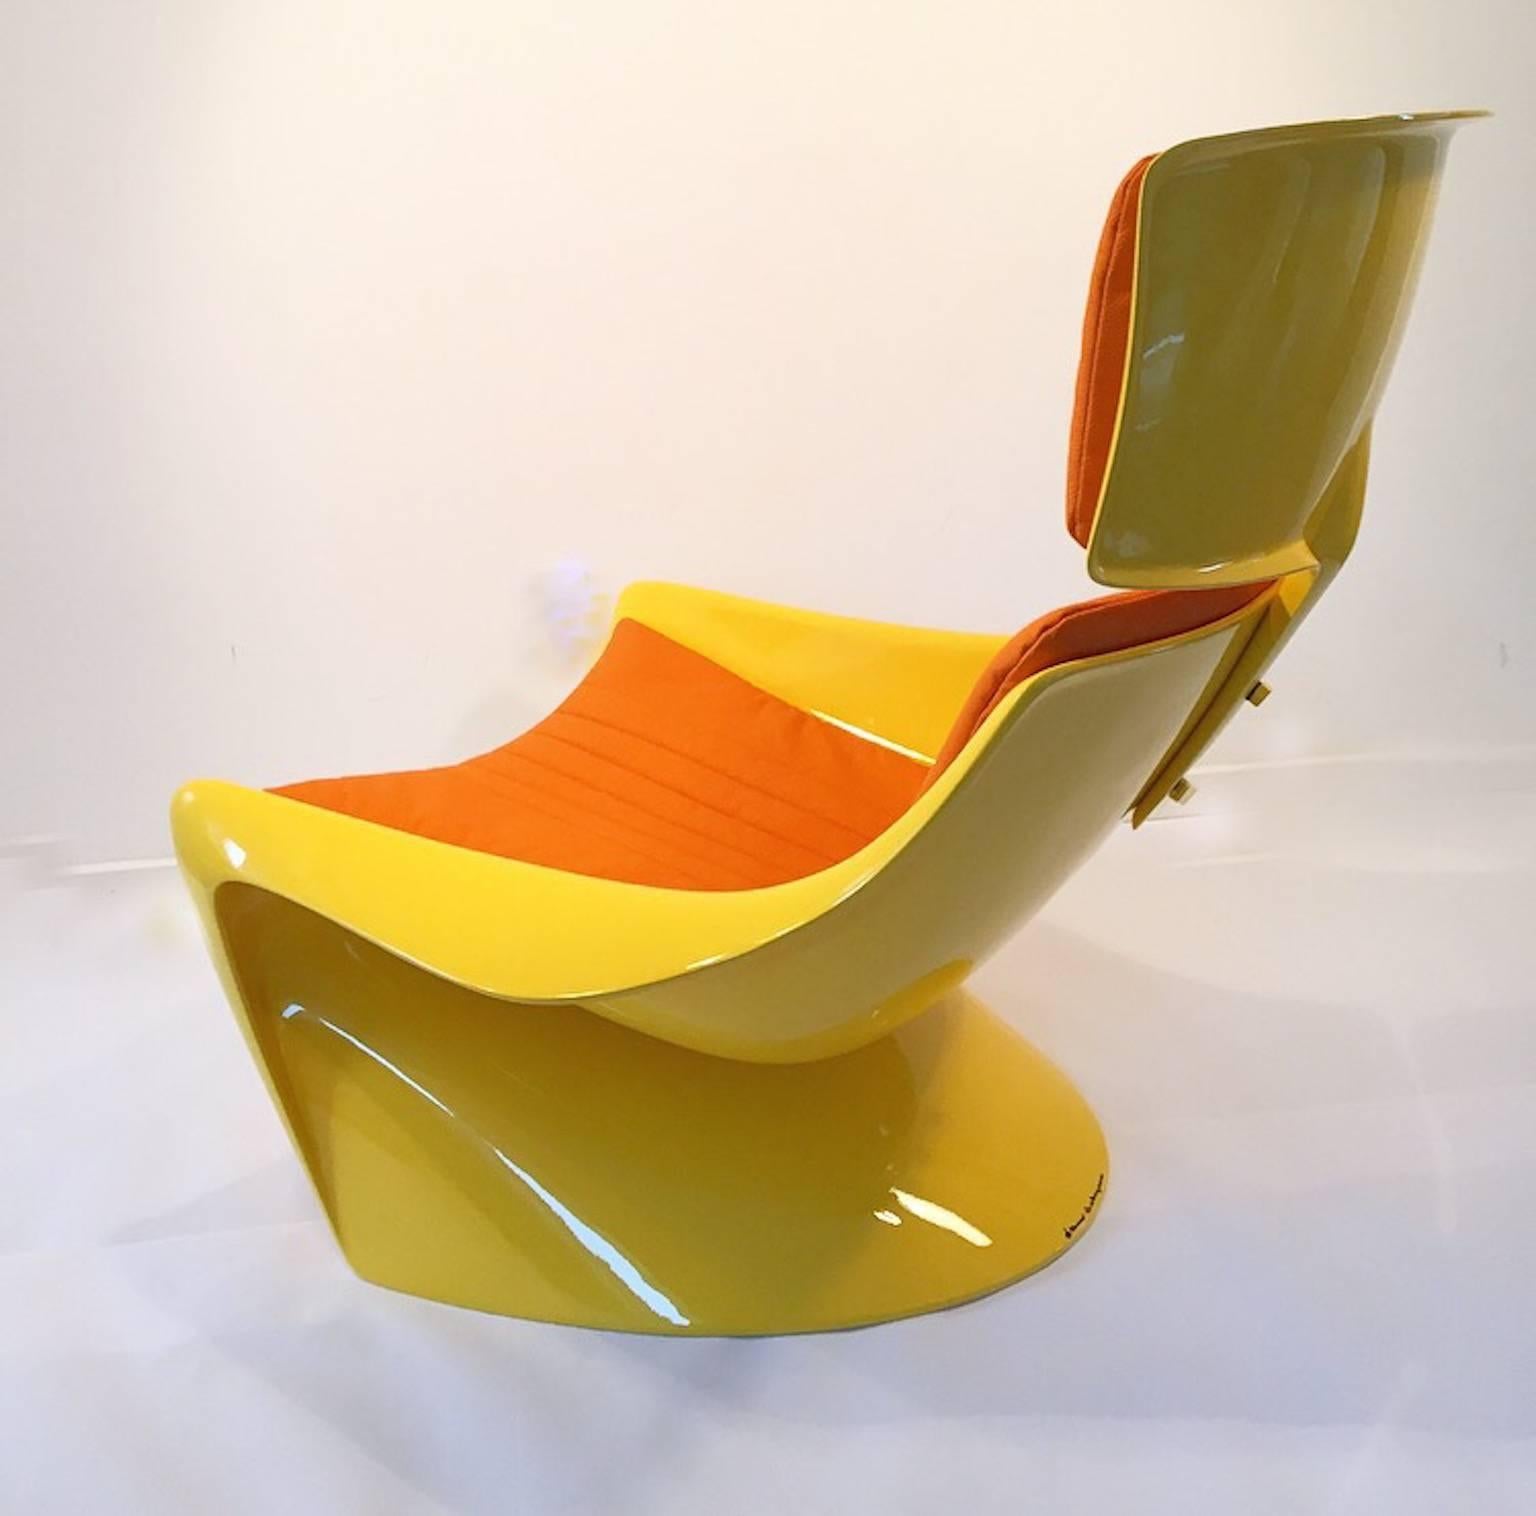 The President lounge chair by Steen Ostergaard 1967.

Steen Østergaard, award winning Industrial designer from the golden age of danish contemporary modern era, has won numerous prizes and his chairs are displayed all-over the world in various